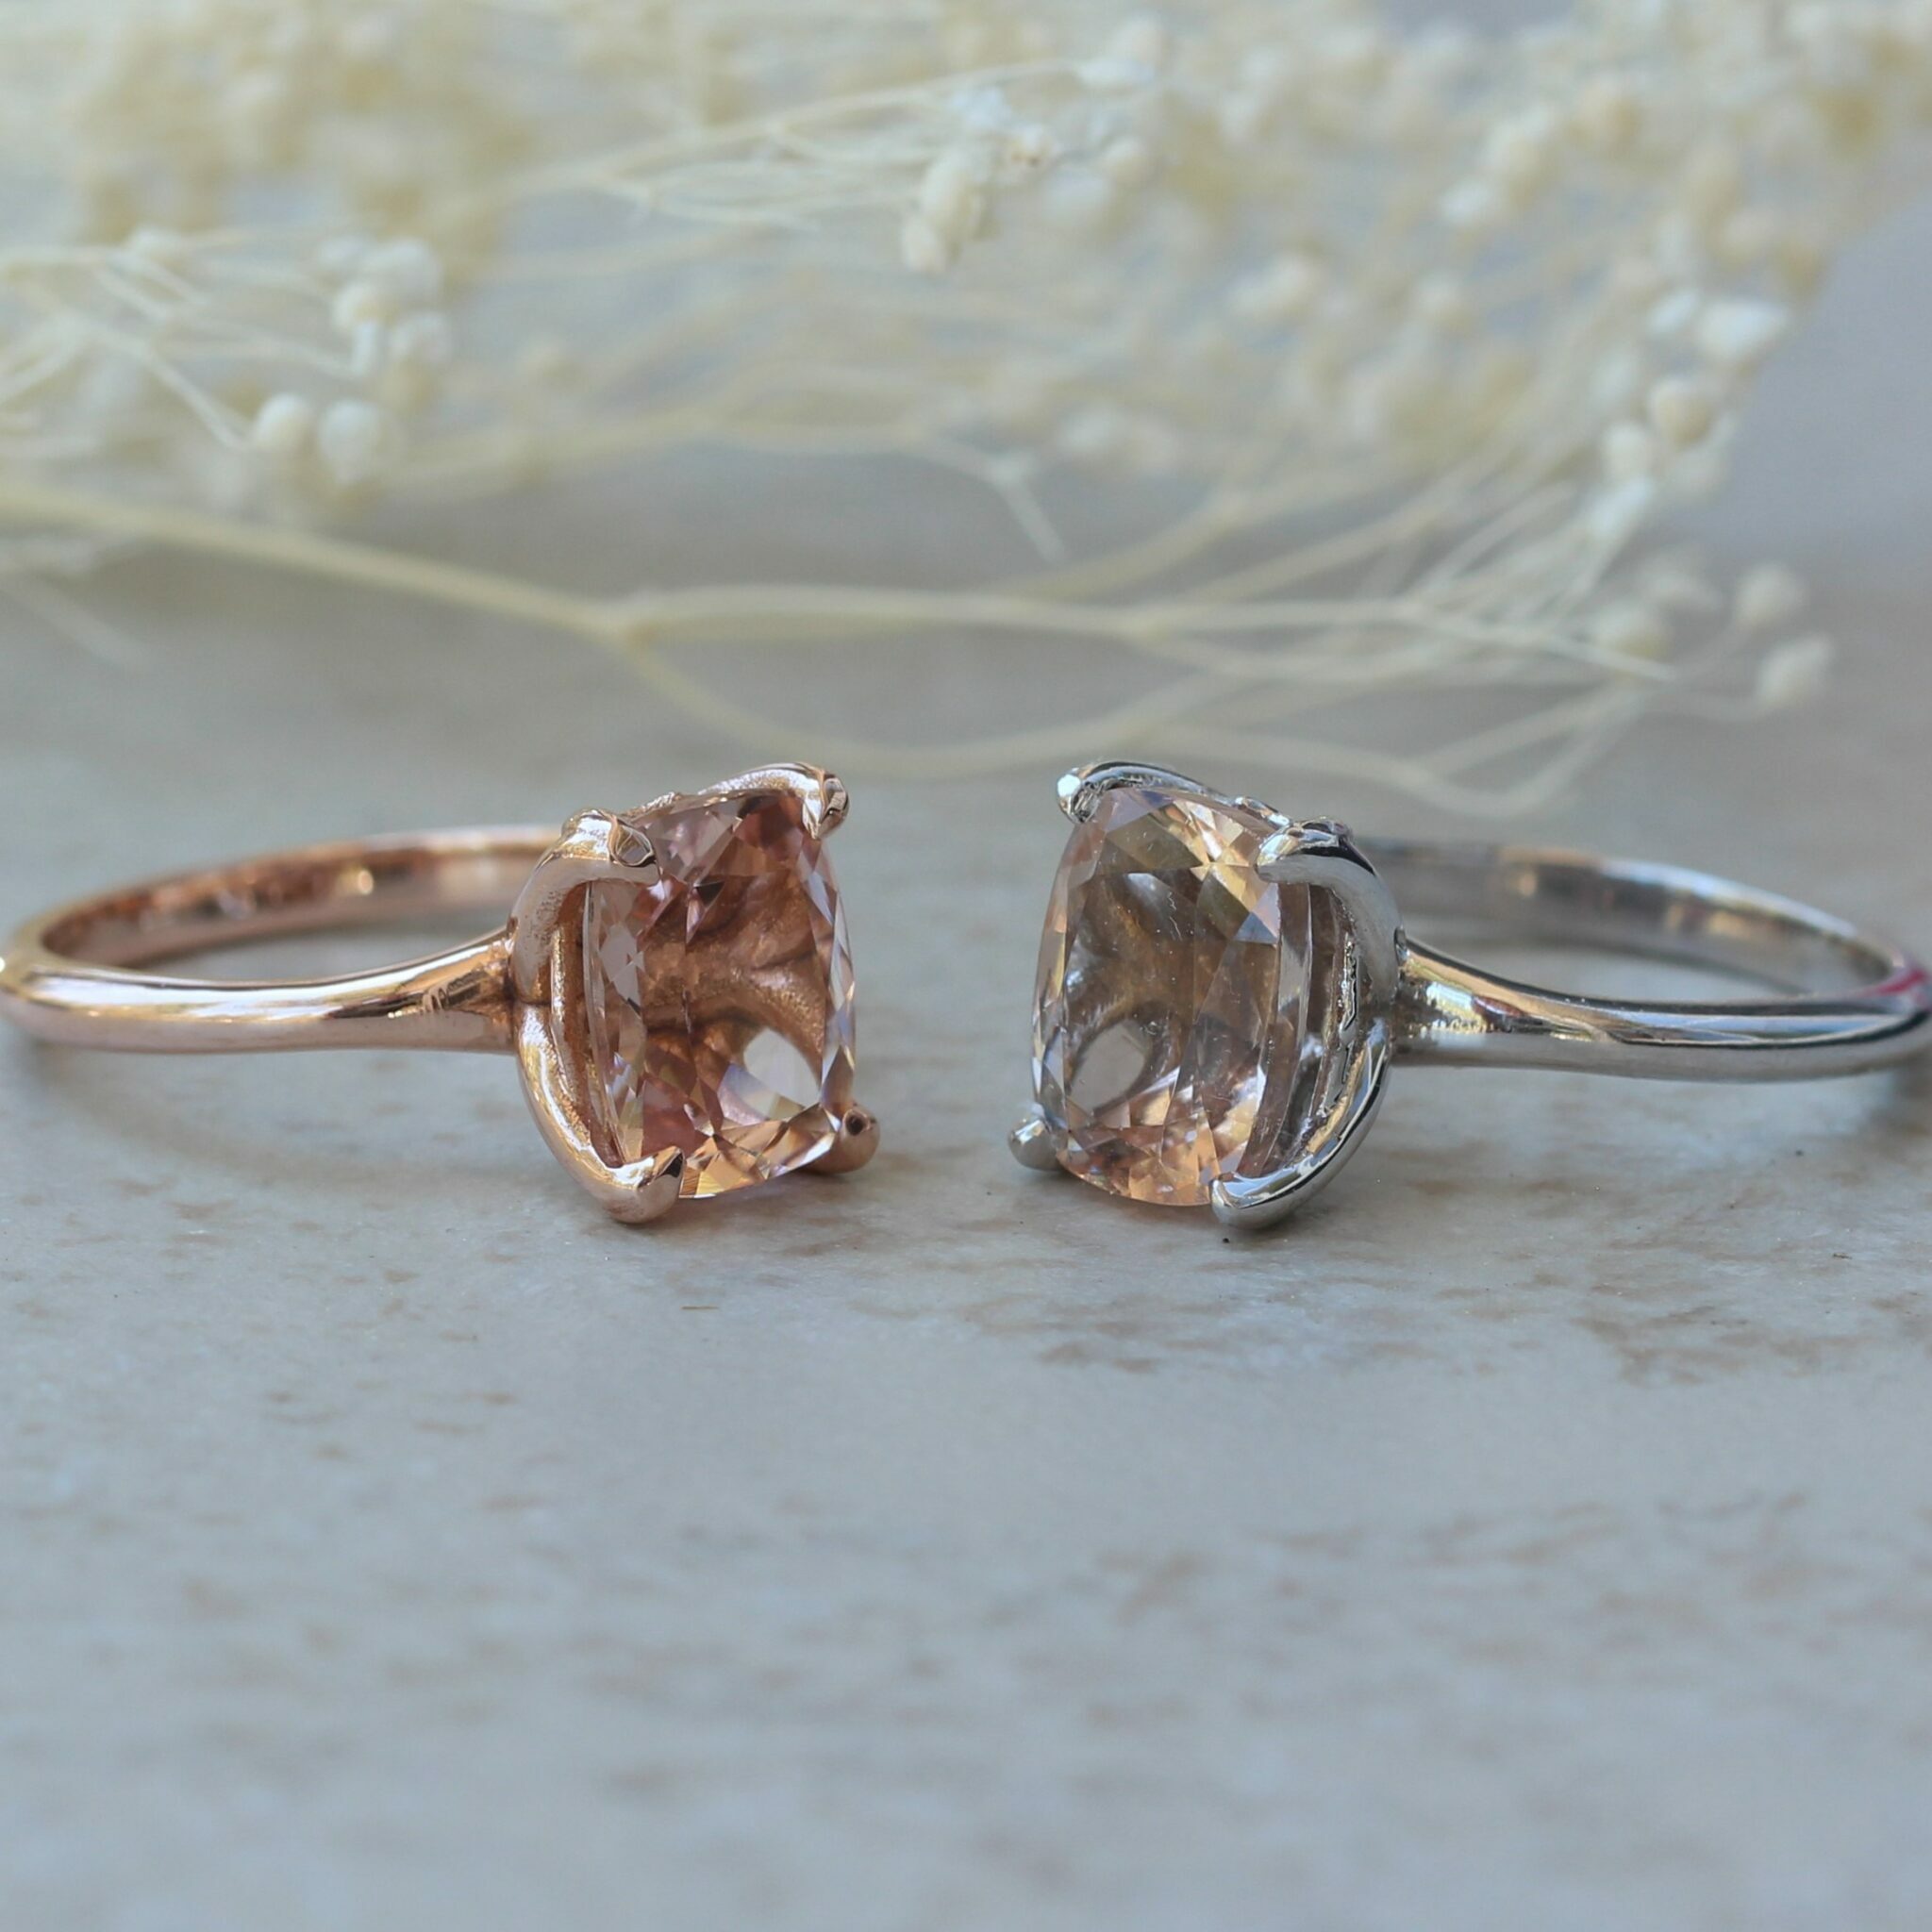 How-does-Morganite-look-in-rose-gold-versus-white-gold-LS5864-2